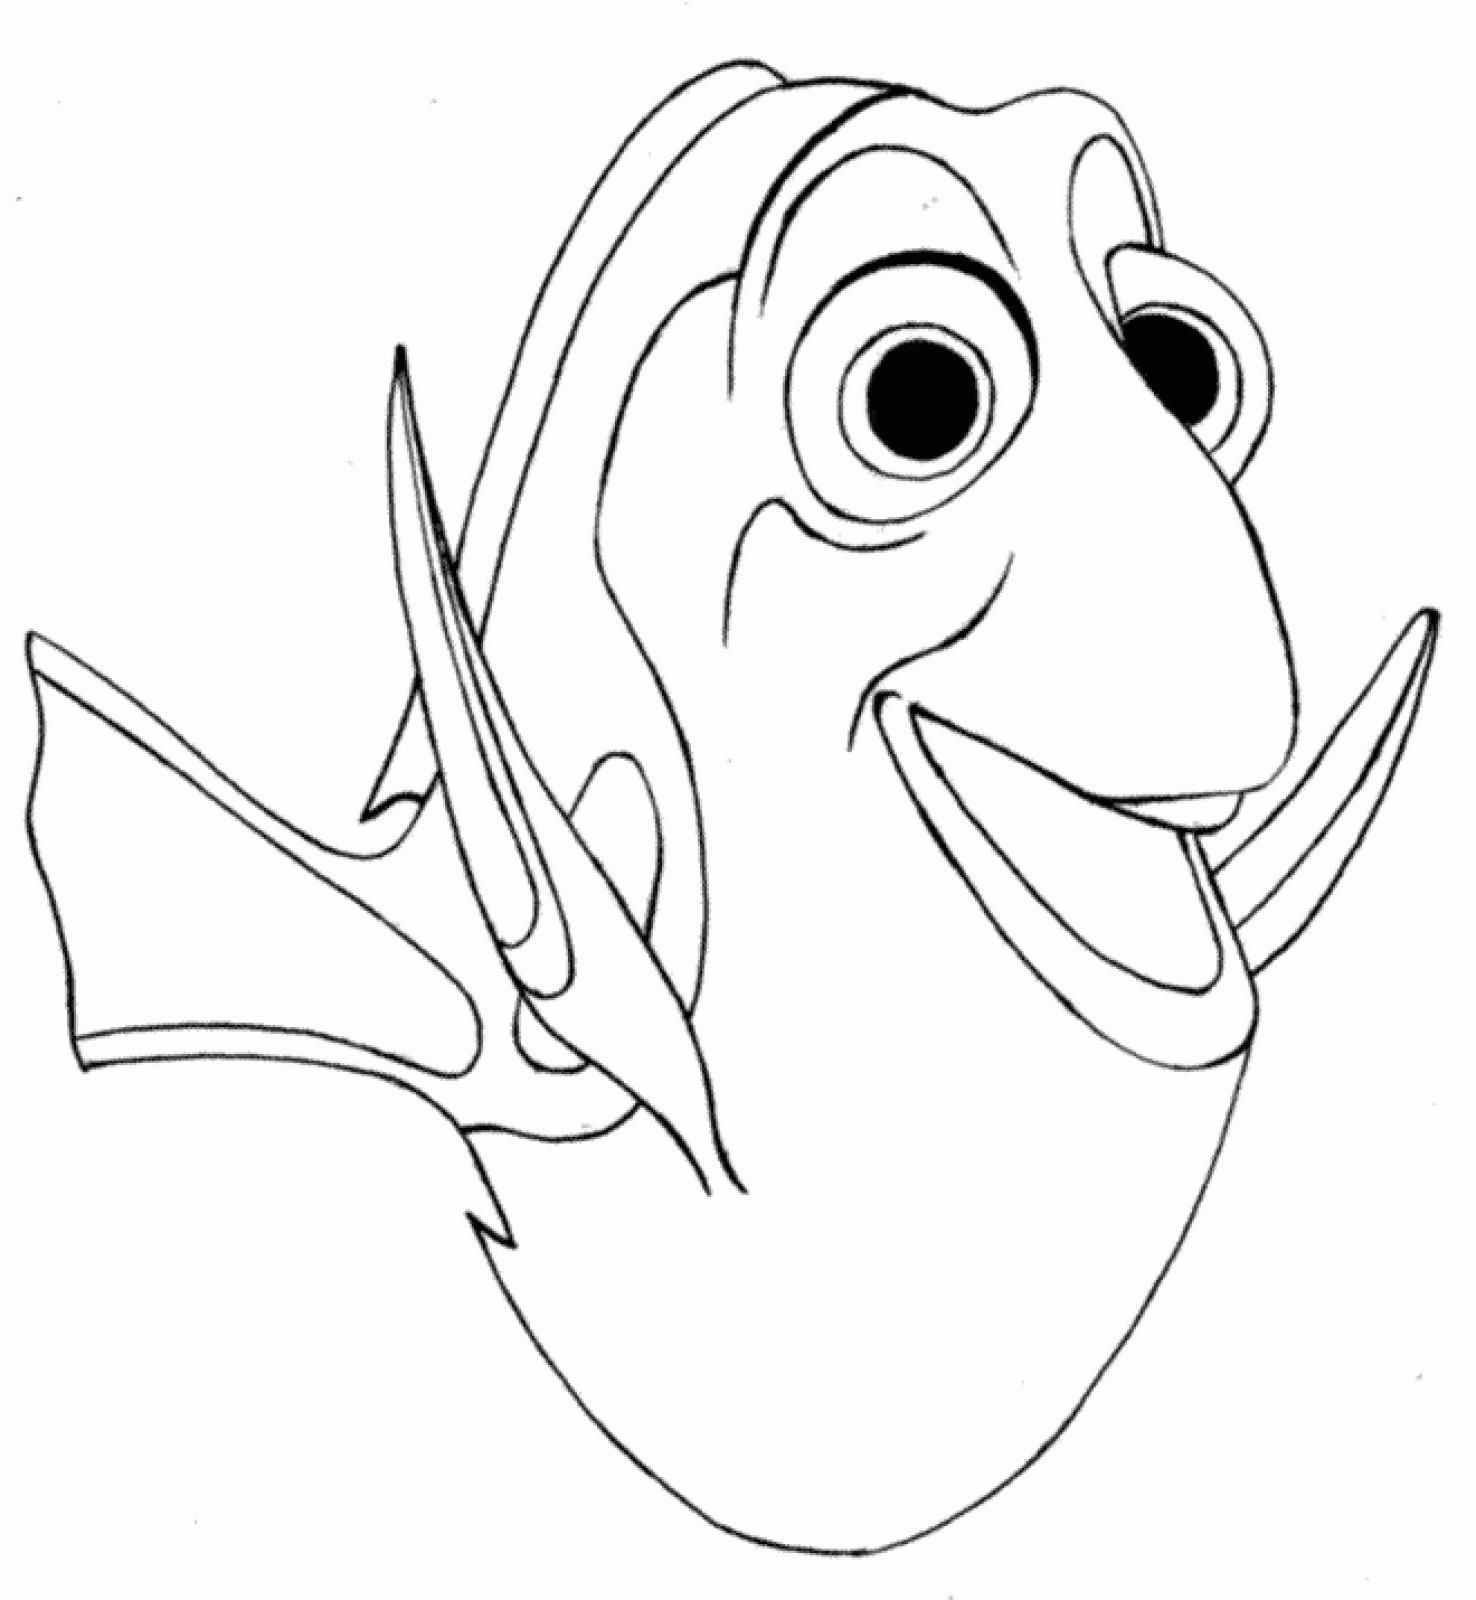 coloring book ~ Phenomenal Nemo And Dory Coloring Pages Photo Ideas Toint  Color Dragons Finding Birthday Party Toys Baby Phenomenal Nemo And Dory  Coloring Pages Photo Ideas. Coloring Pages For Kids. Coloring